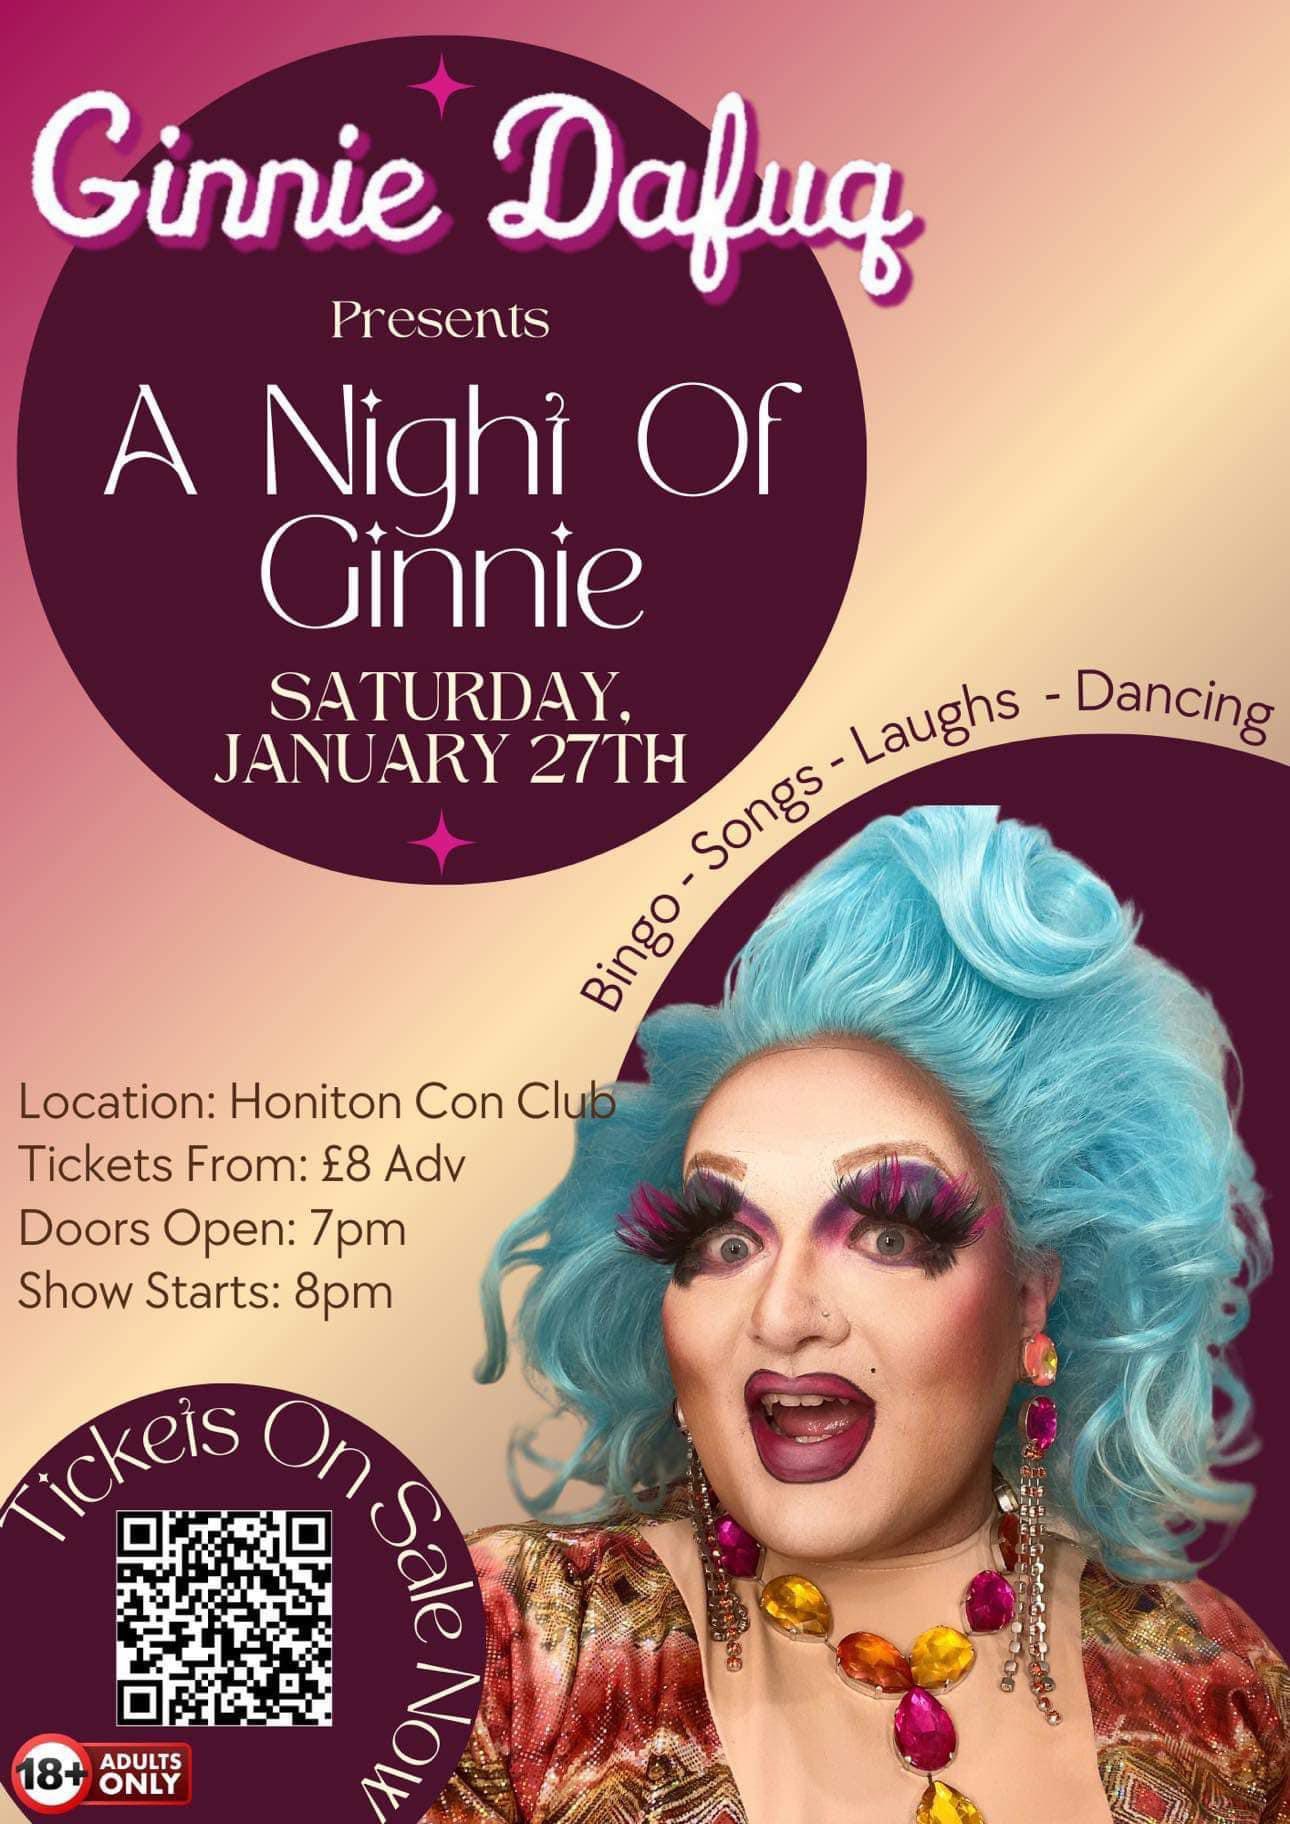 Ginnie Dafuq presents: A Night Of Ginnie; A fun filled evening of Bingo, songs, laughs and dancing